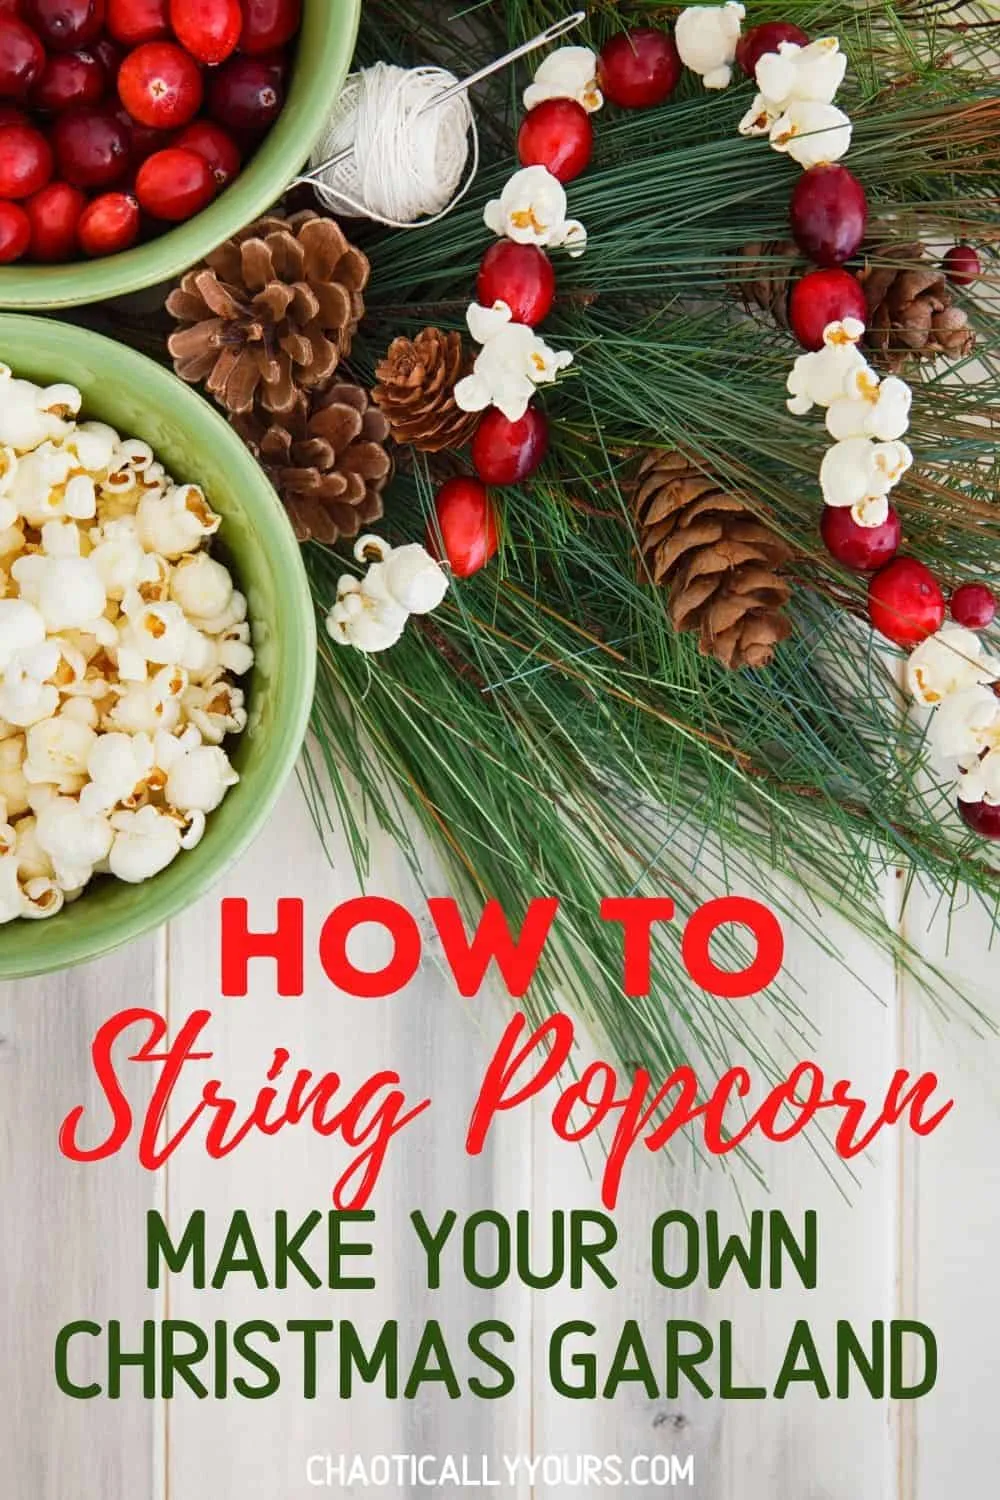 How To String Popcorn pin image